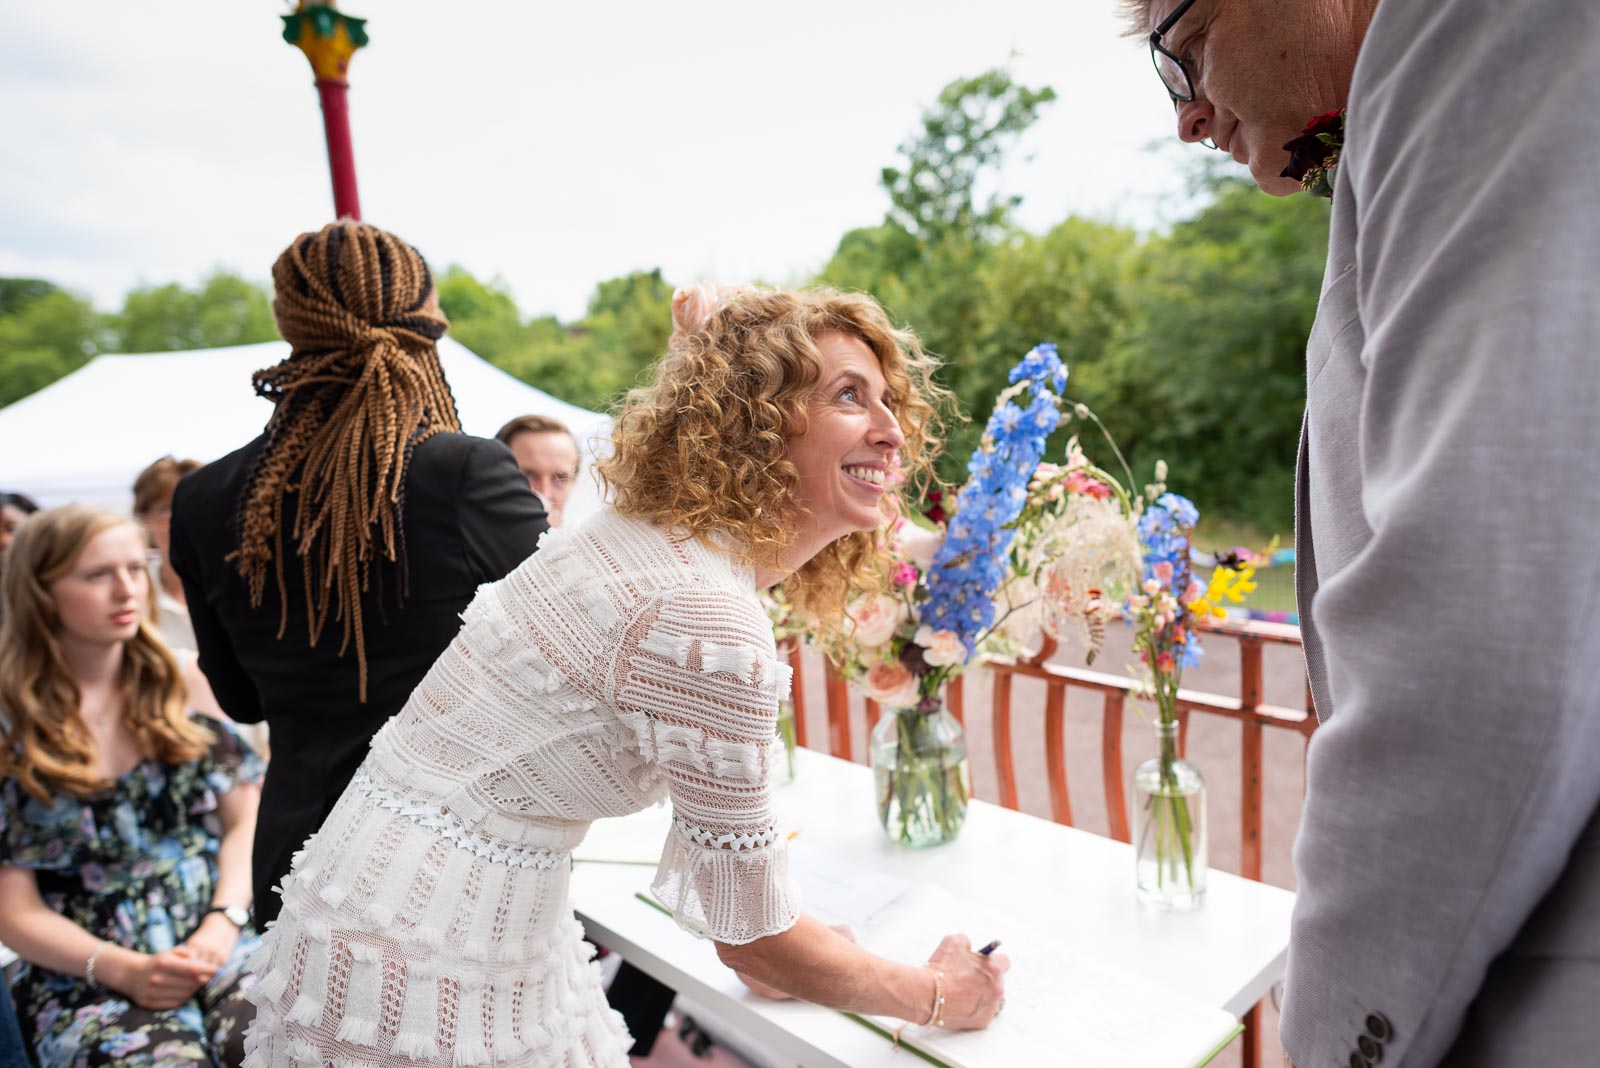 Kitty and Will sign the wedding register during their ceremony in the Band Stand at Queens Park in London.